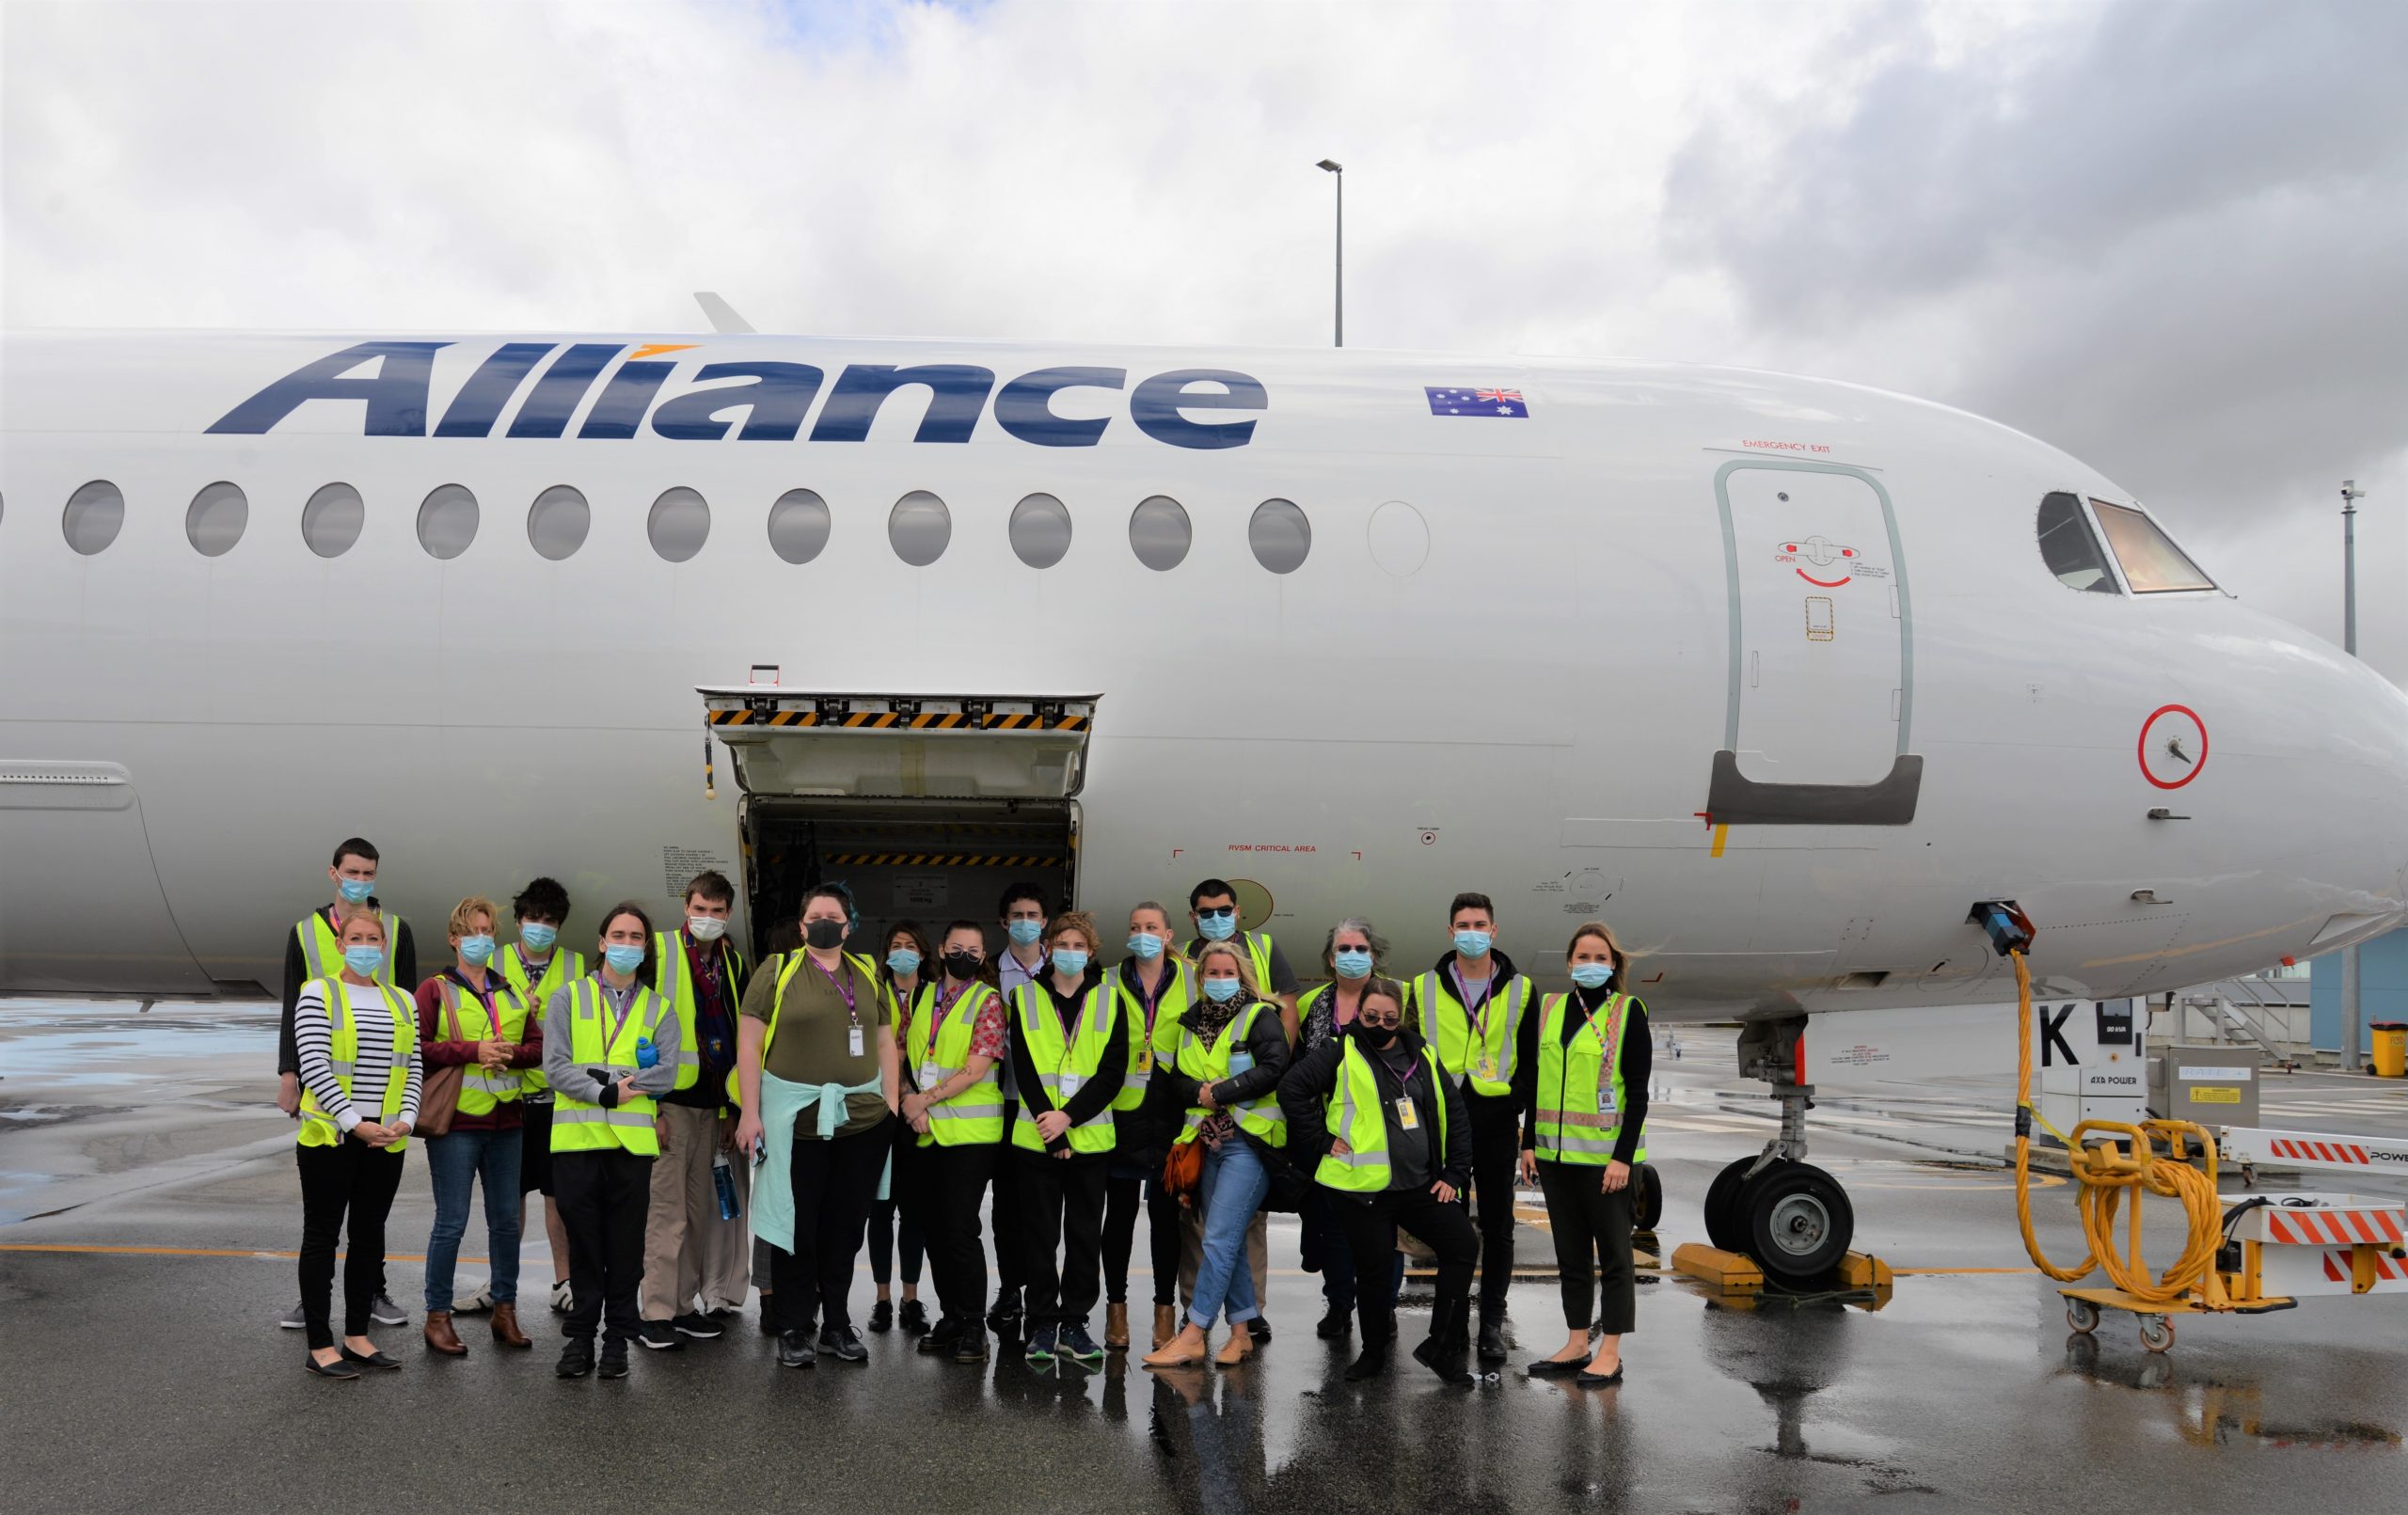 Rocky Bay customers standing in front on an Alliance Airlines plane at Perth Airport